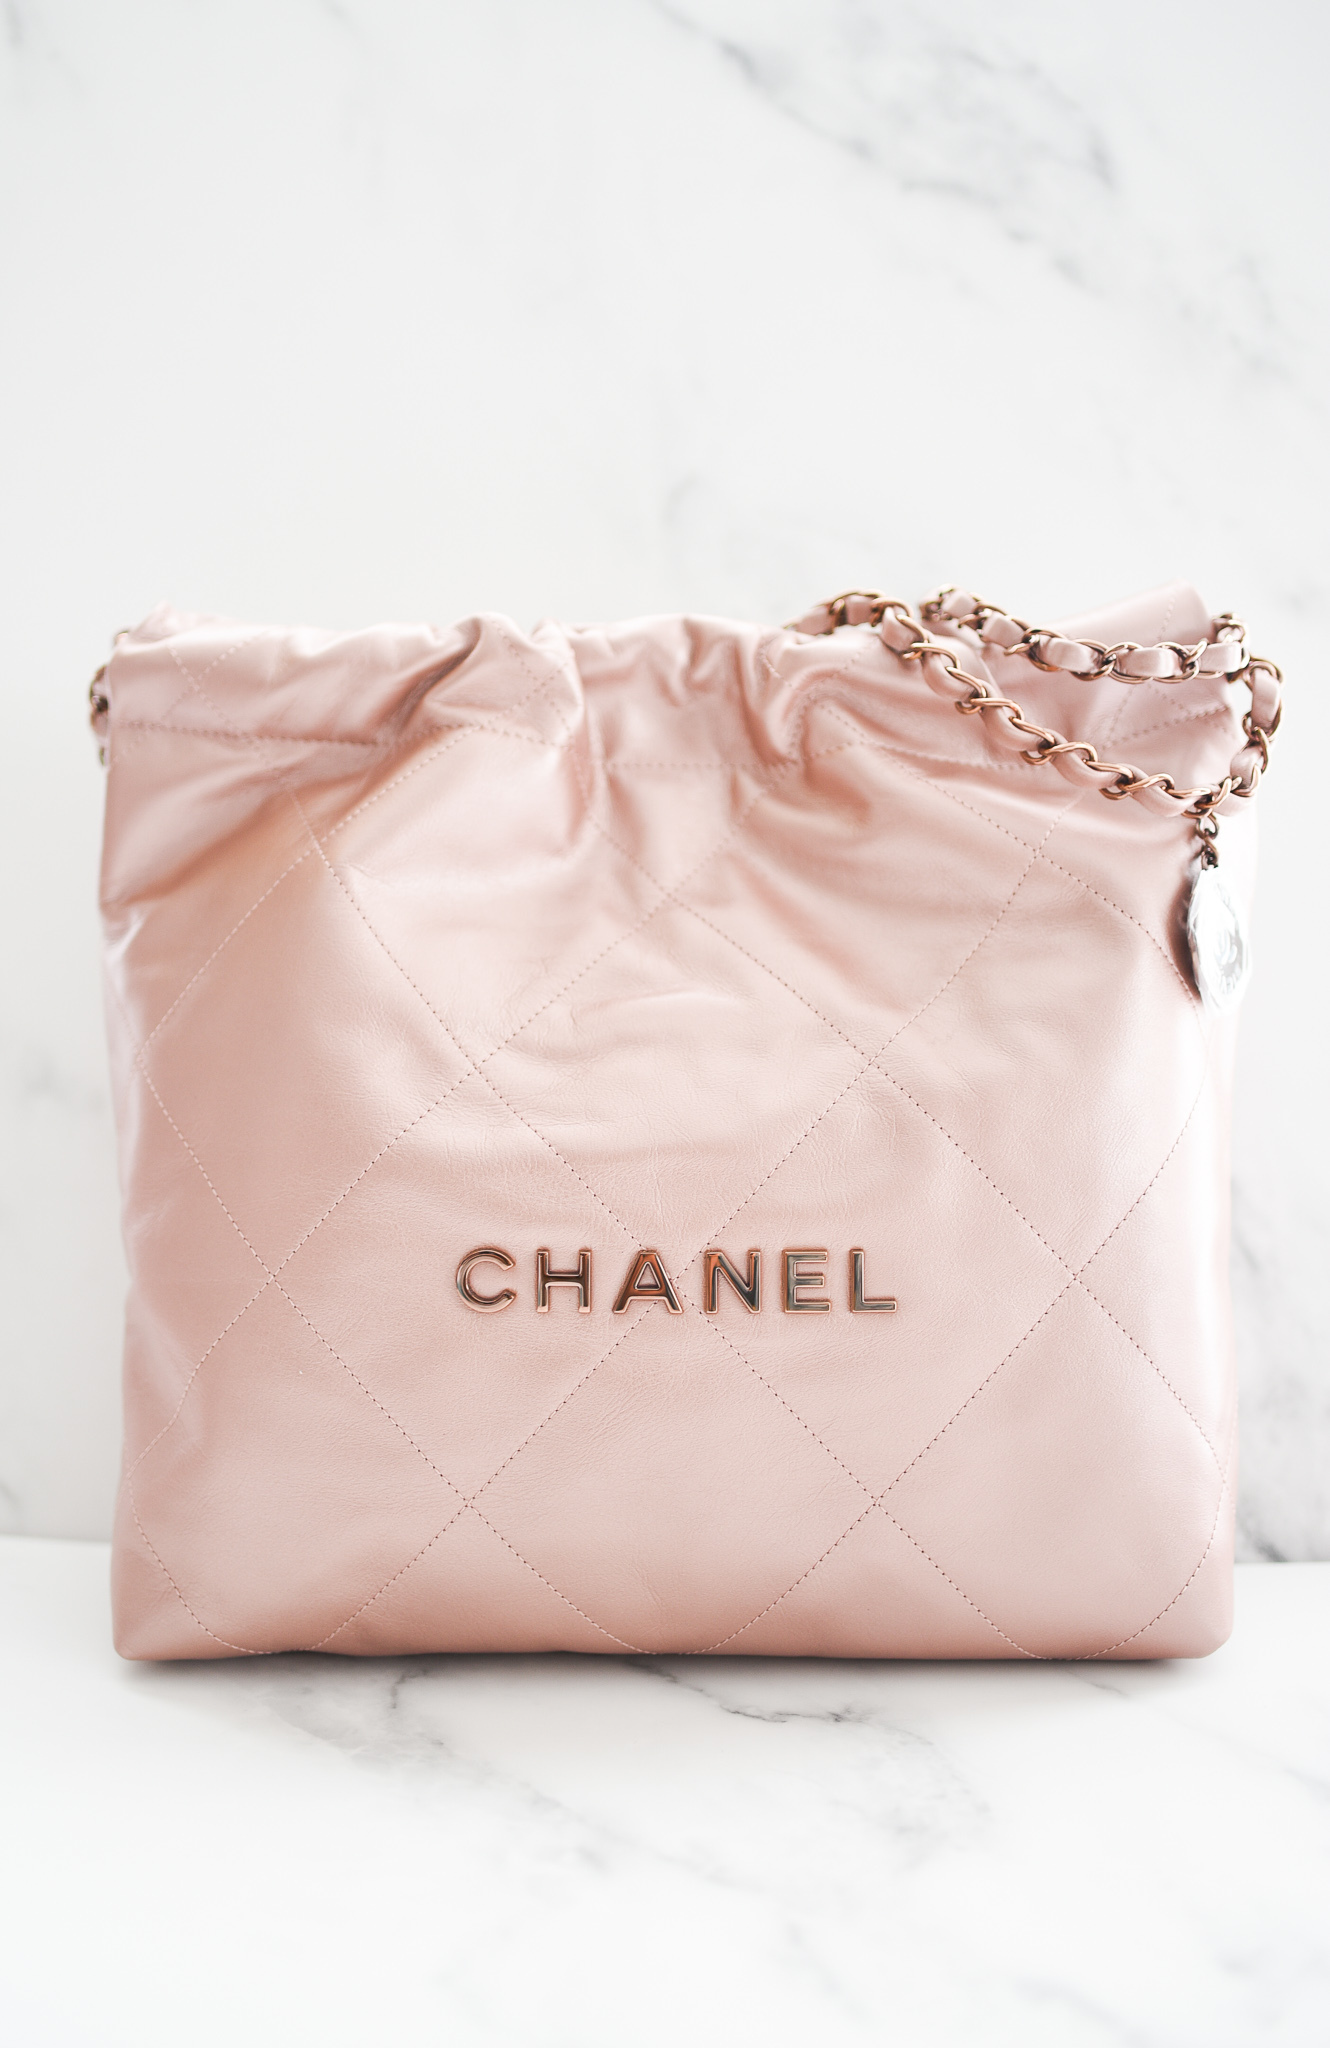 Chanel 22 Small Quilted Hobo Tote, Rose Gold Calfskin with Gold Hardware,  New in Box GA001 - Julia Rose Boston